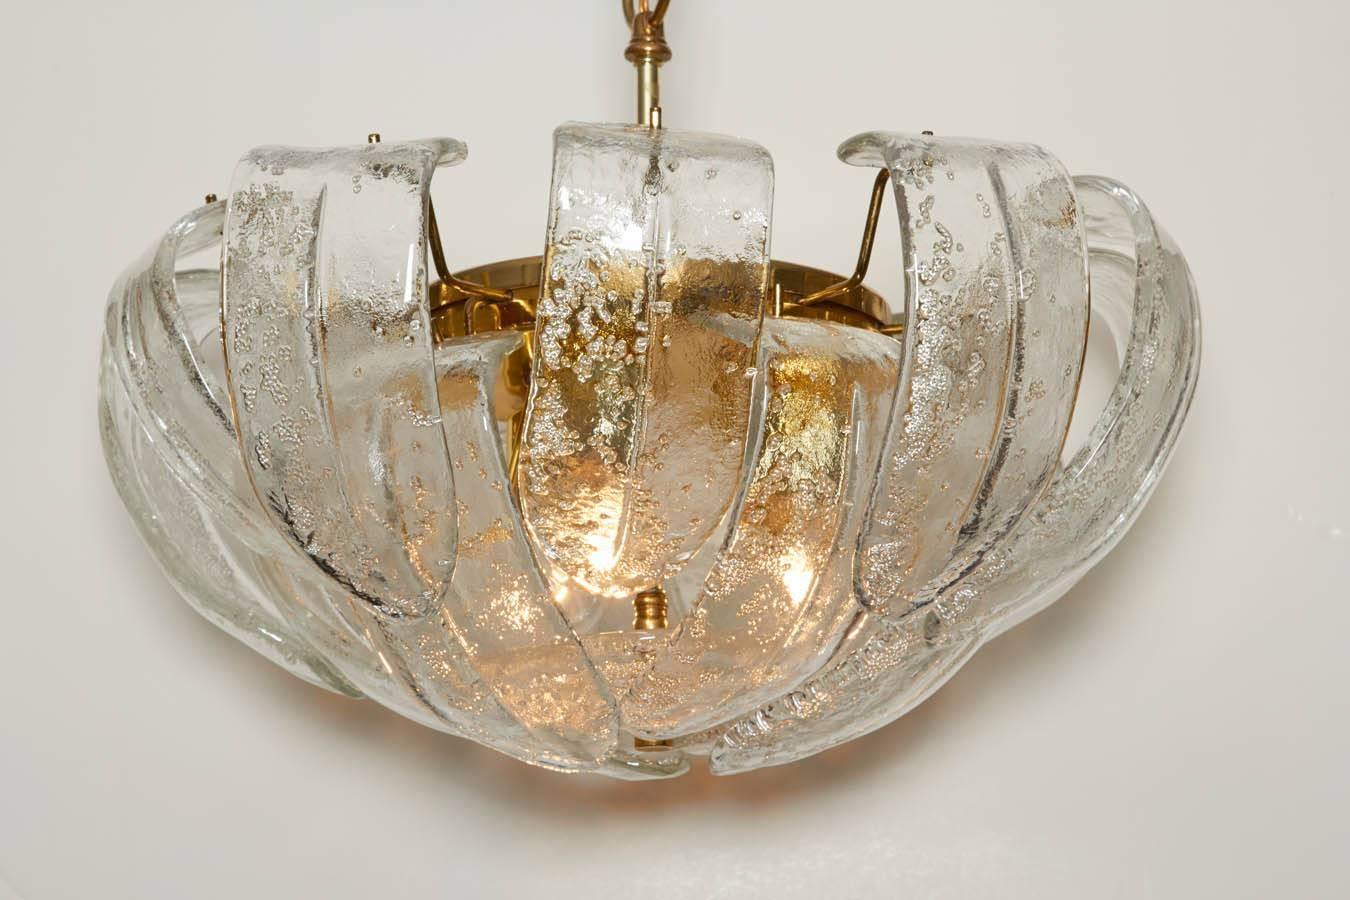 Lovely chandelier with thick, sculpted Mazzega art glass crystals. Each crystal was blown with controlled bubbles which add texture and sparkle. Chandelier has a brass armature. Please contact for location.